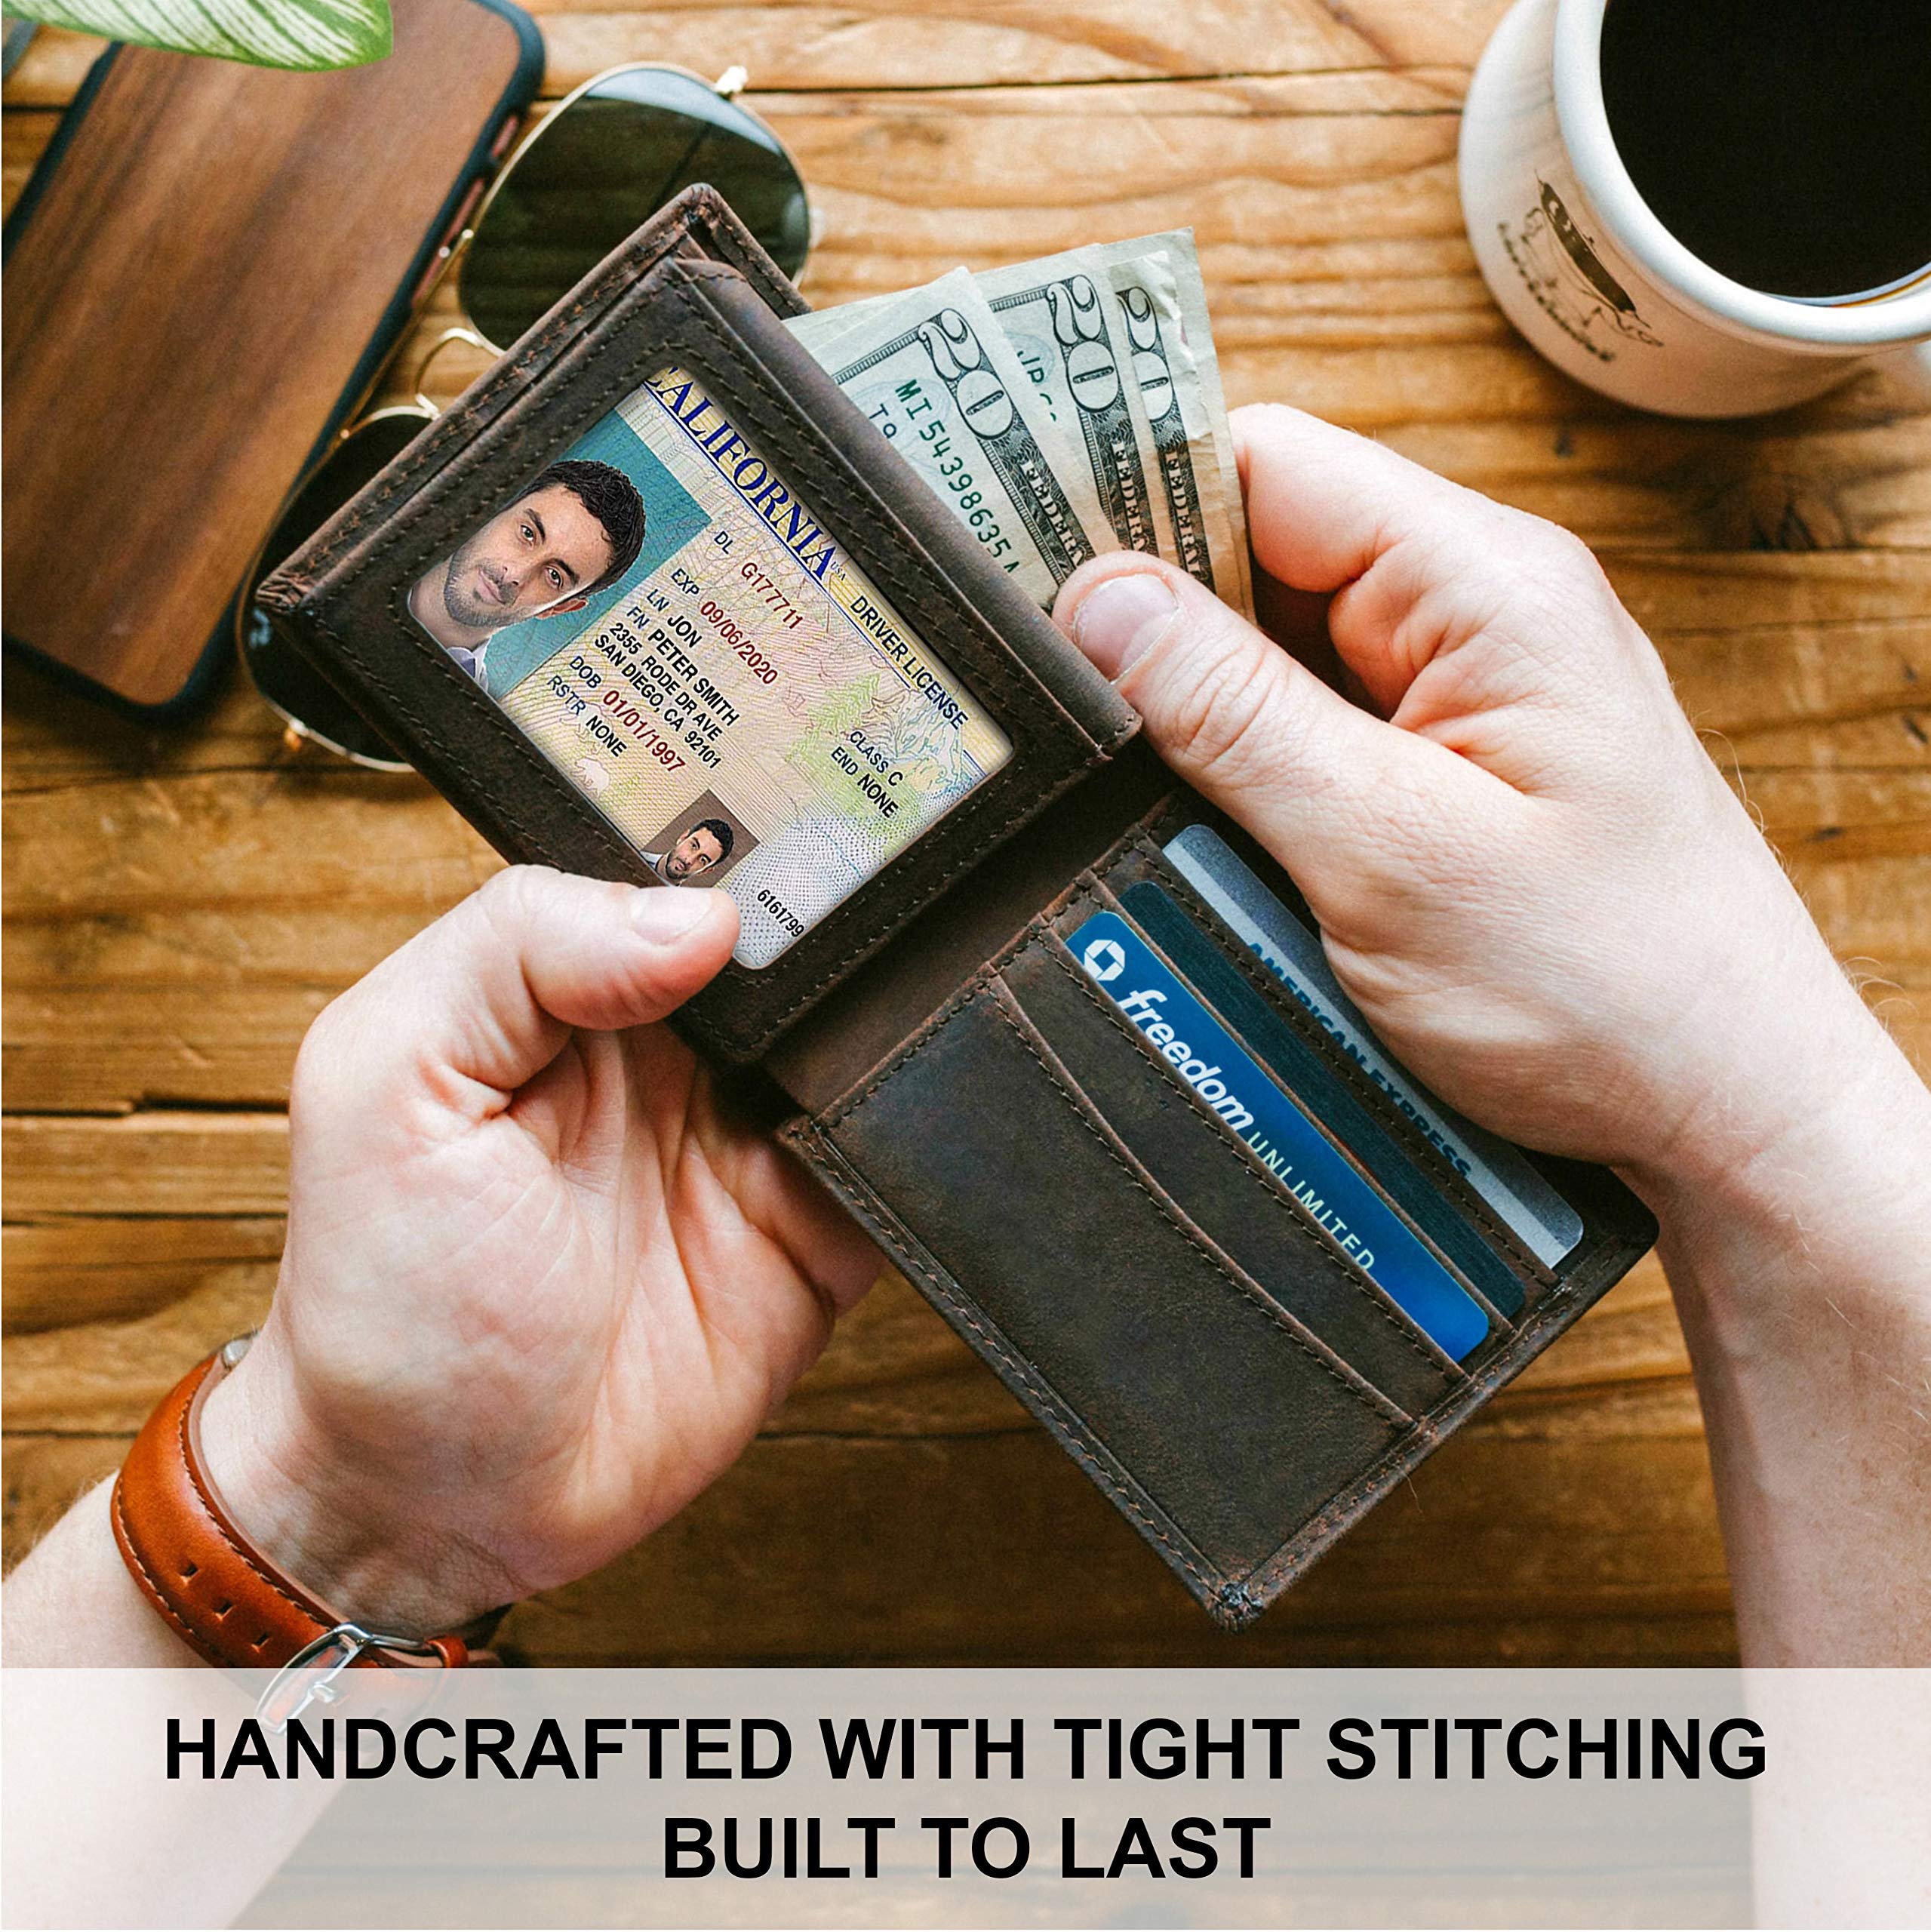 STAY FINE Top Grain Leather Wallet for Men | RFID Blocking | Extra Capacity Bifold Wallet with 2 ID Windows | Ultra Strong Stitching | Slim Billfold with 8 Card Slots | Gift for Him